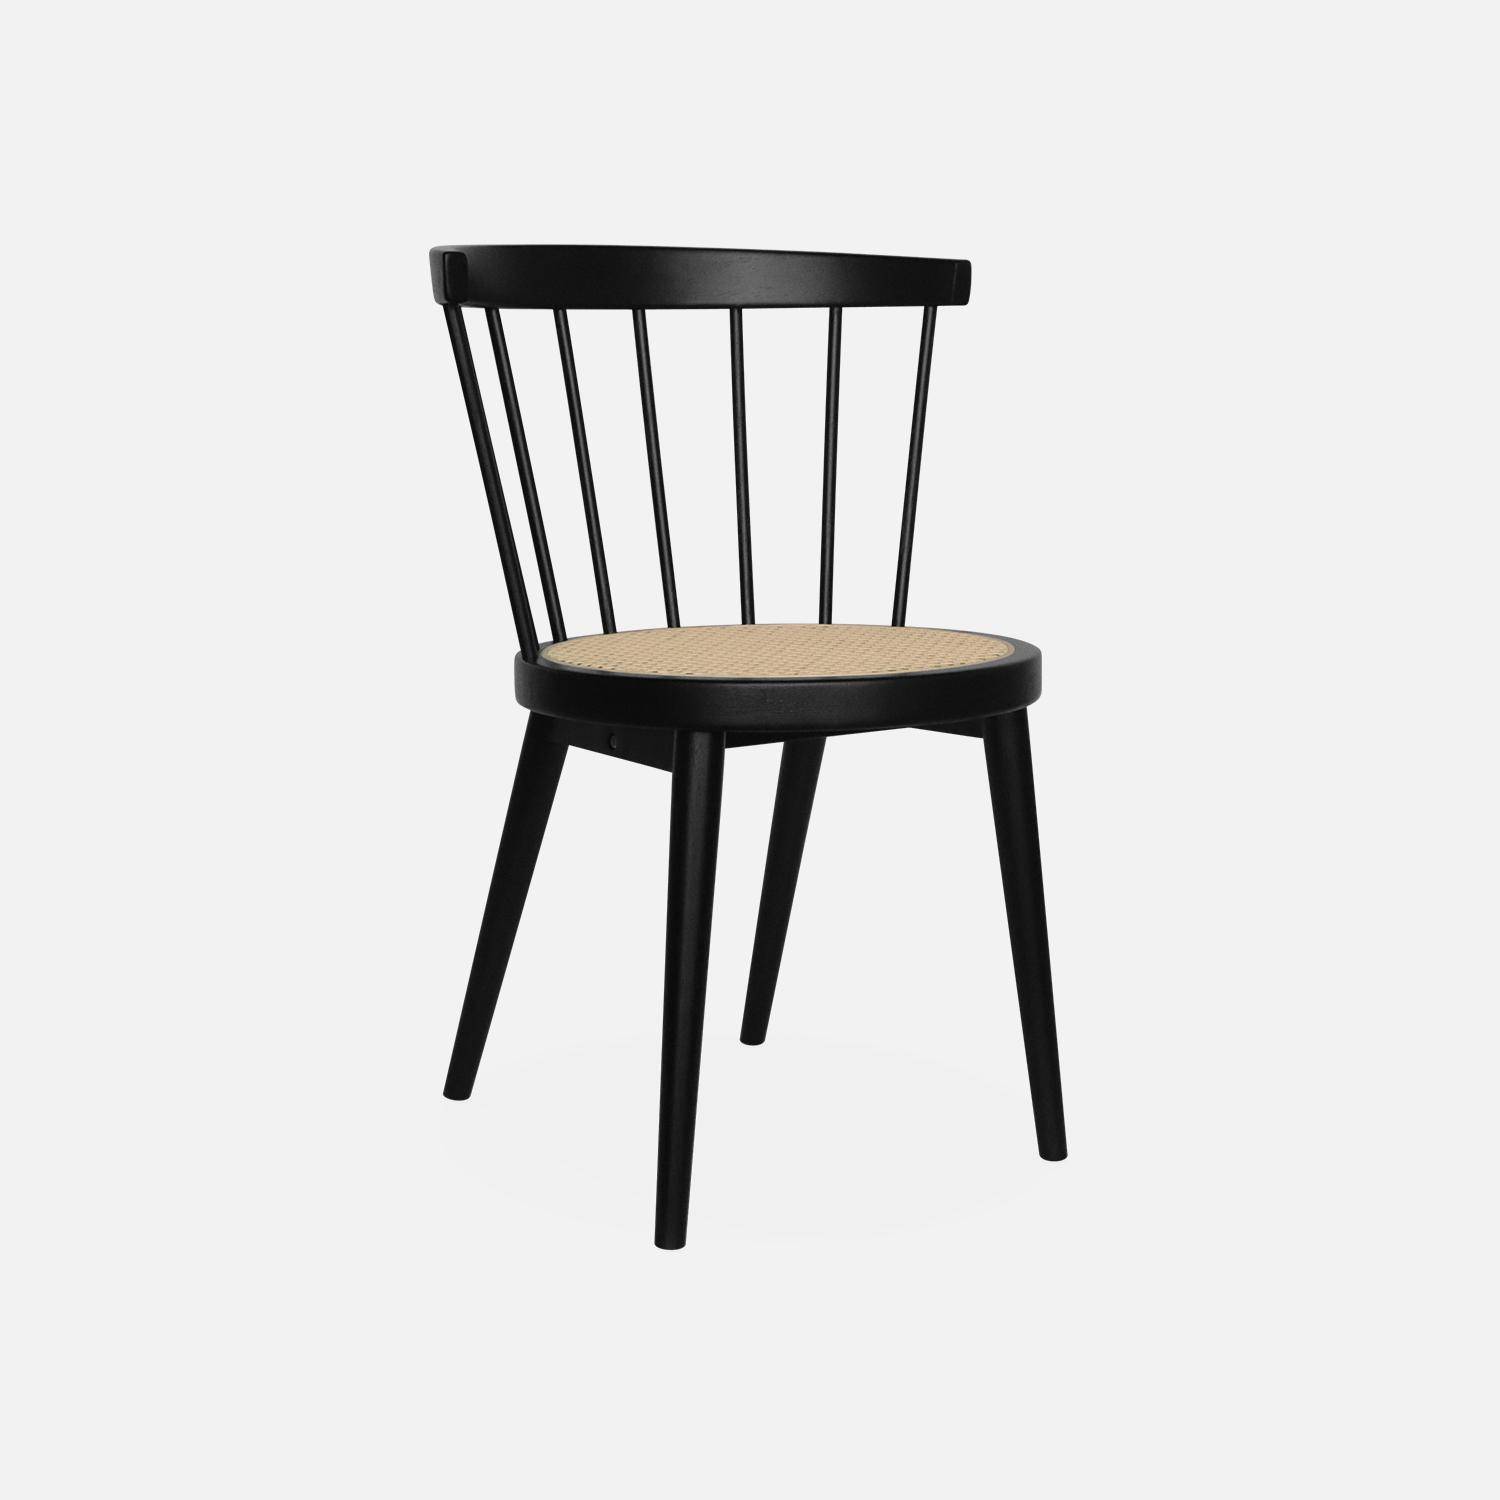 Pair of wood and cane dining chairs, W53 x D53.5 x H76cm, black Photo5